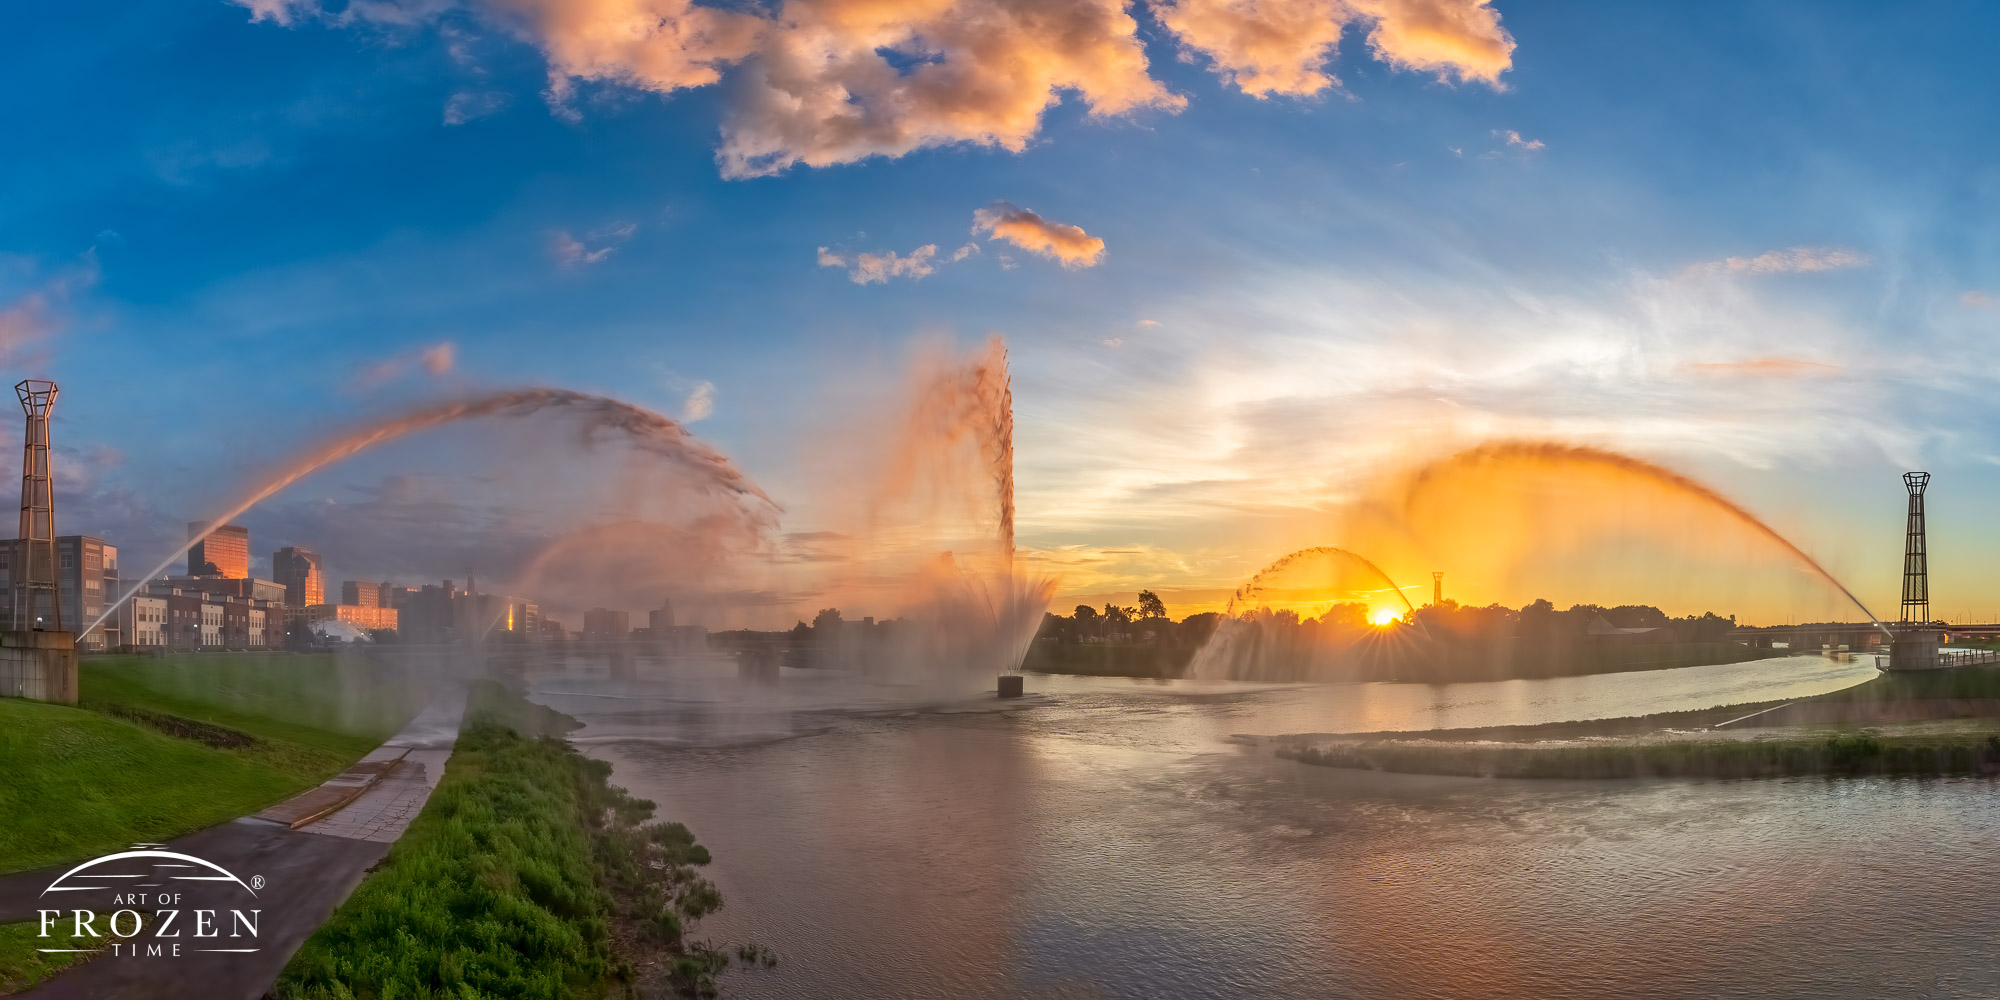 Dayton Fine Art Photography featuring the RiverScape MetroPark Fountain of Lights during a colorful sunset. A perfect print for Dayton Corporate Art